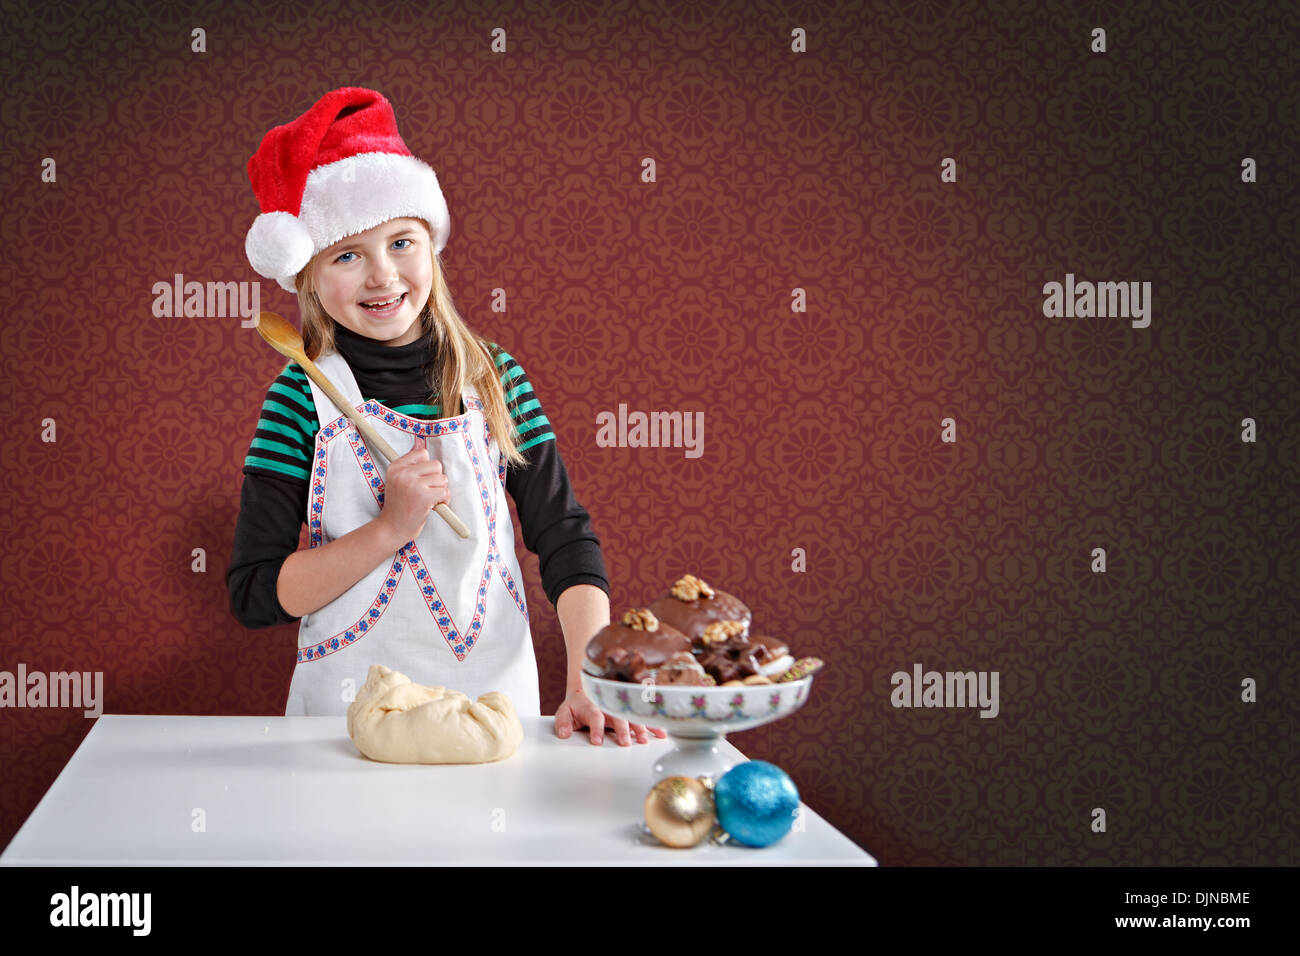 little girl making xmas cookies in front of red background Stock Photo